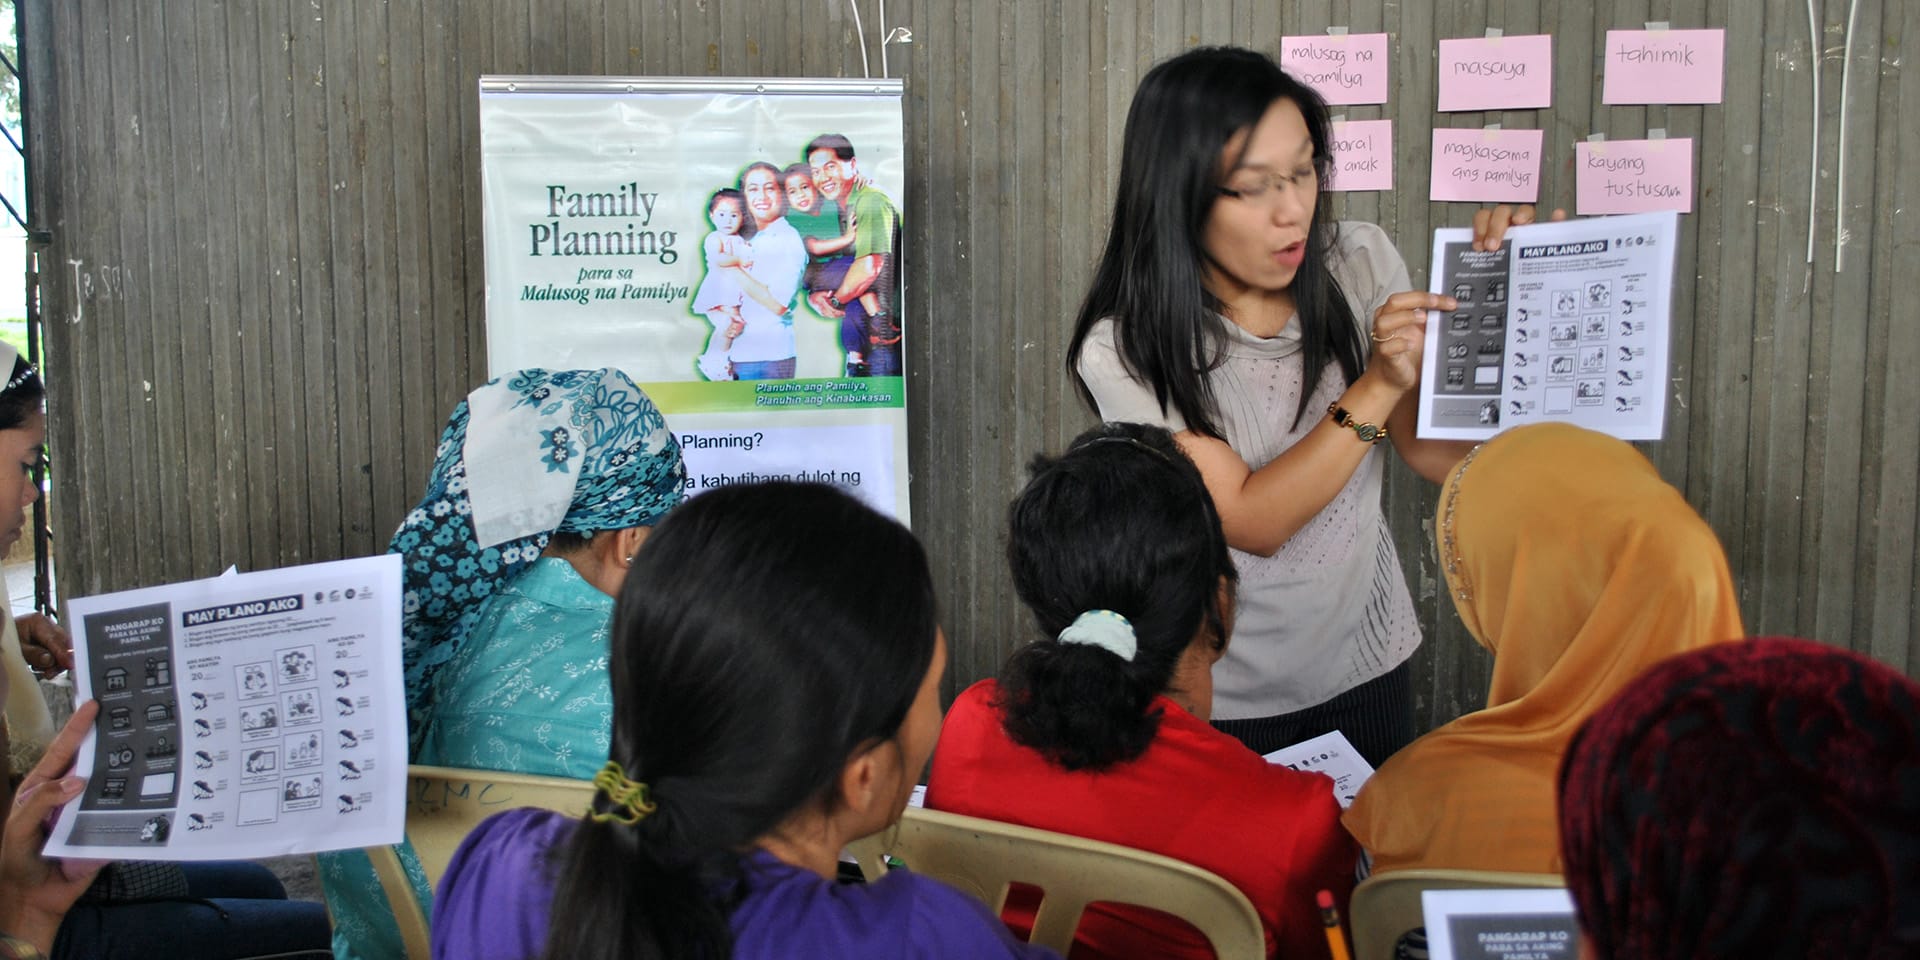 An instructor discusses family planning